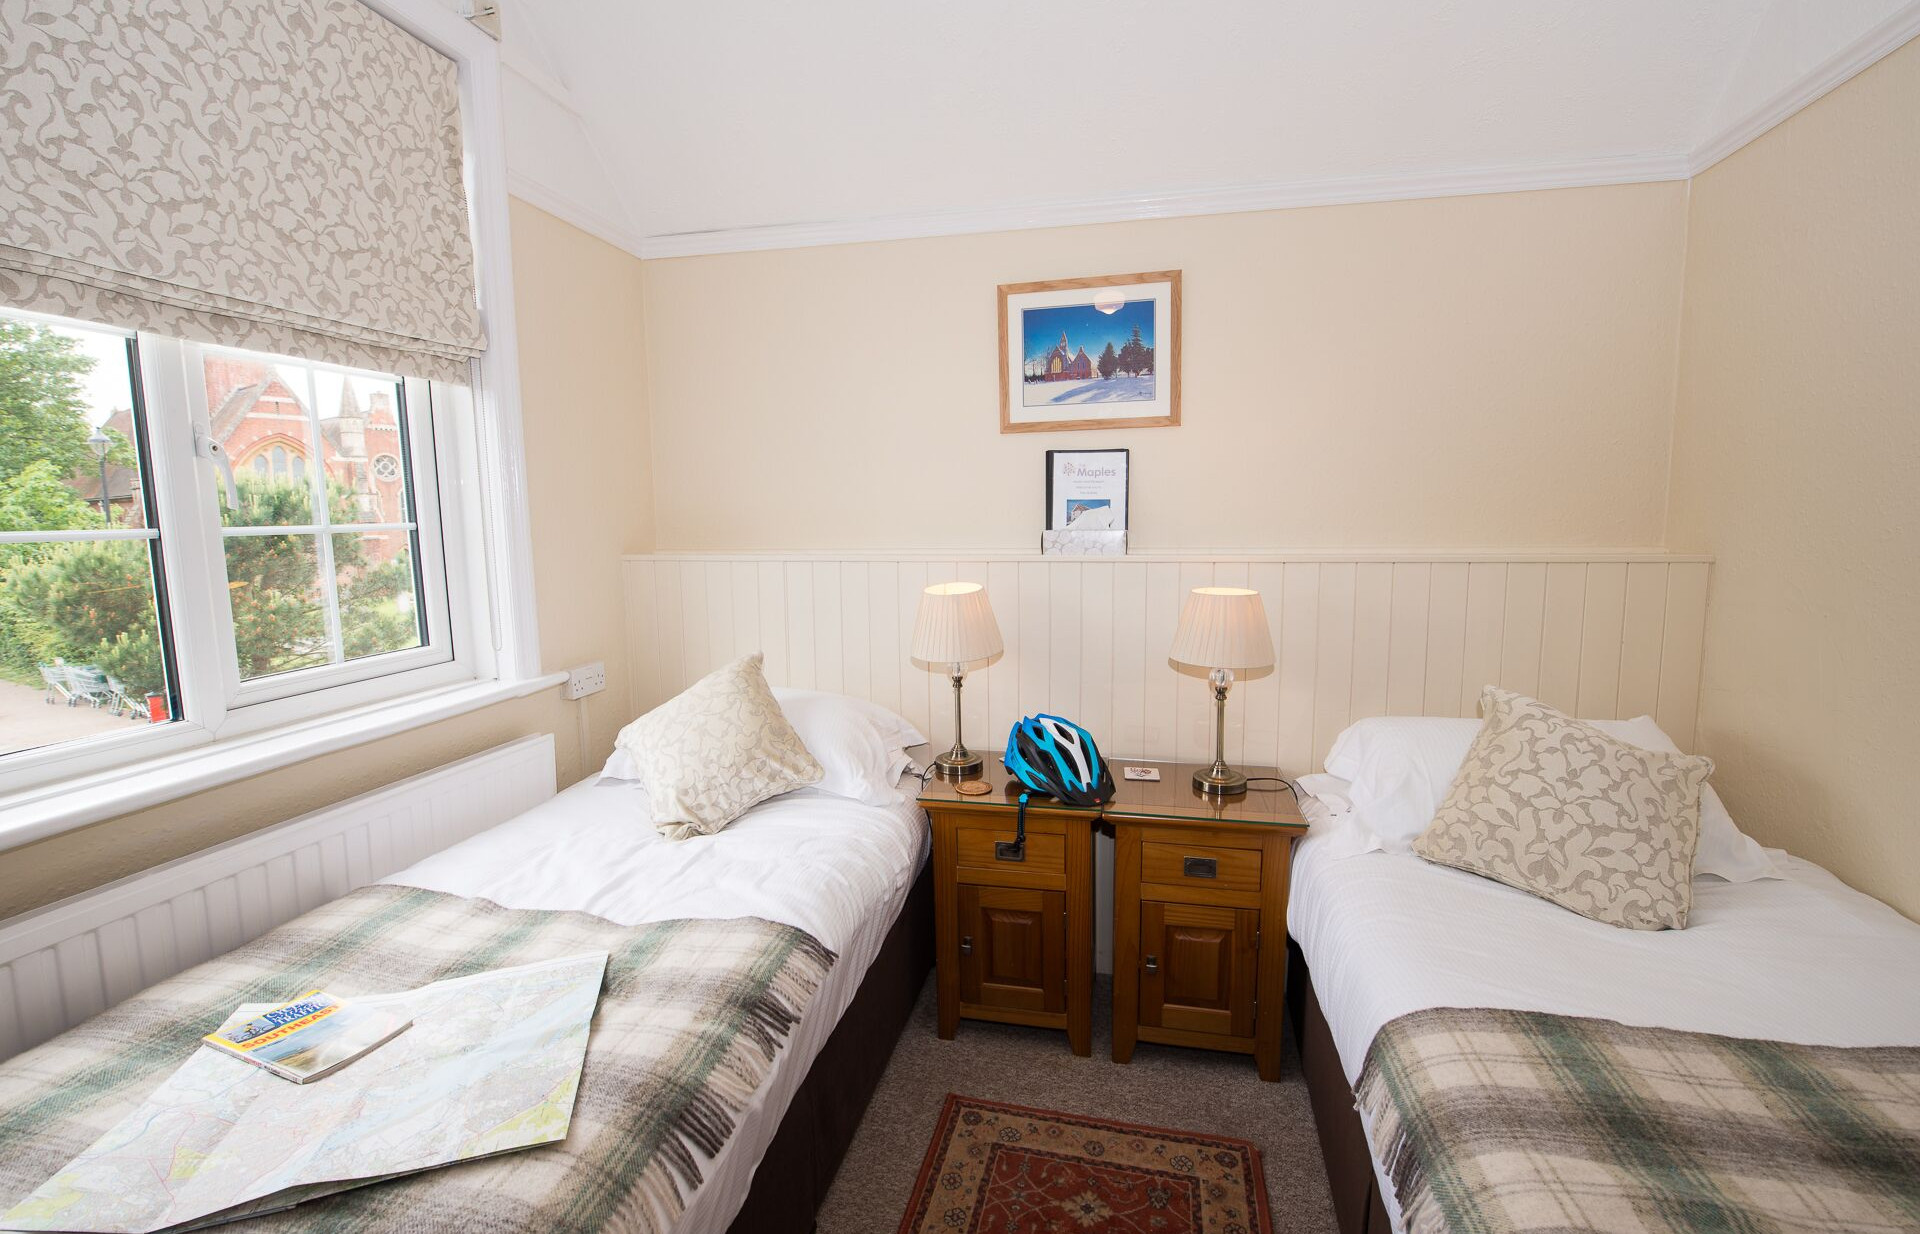 Bed and Breakfast Room 3 in The New Forest